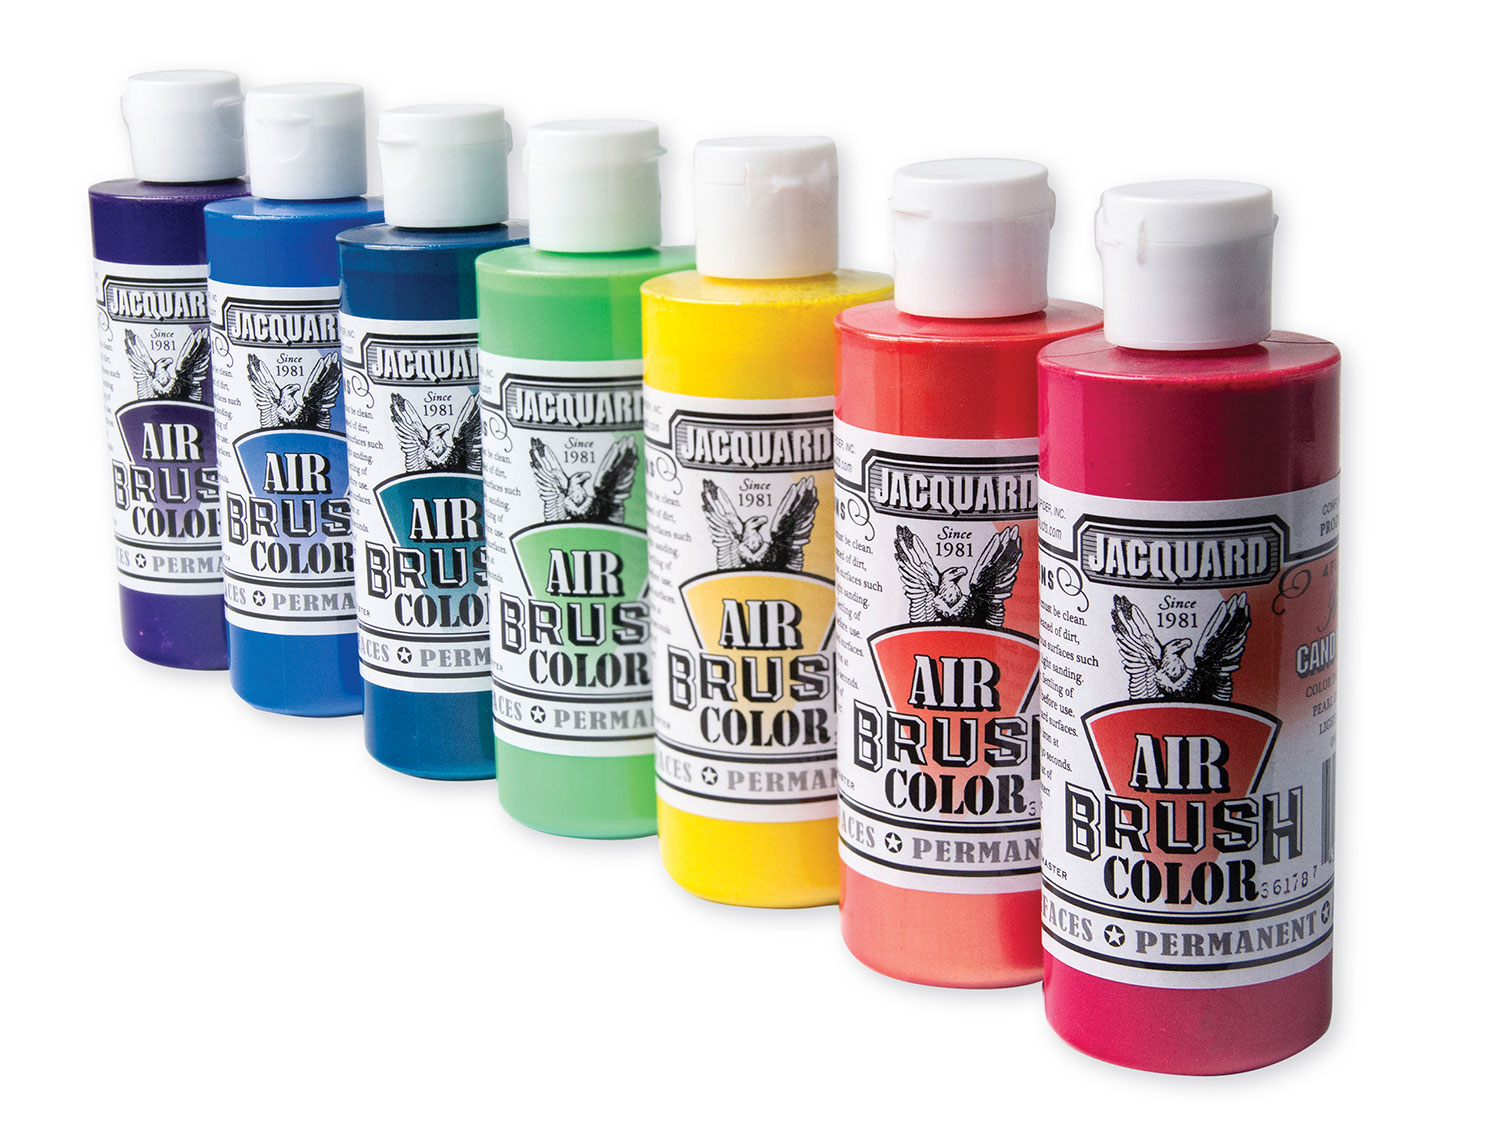 Jacquard Products — Airbrush Color